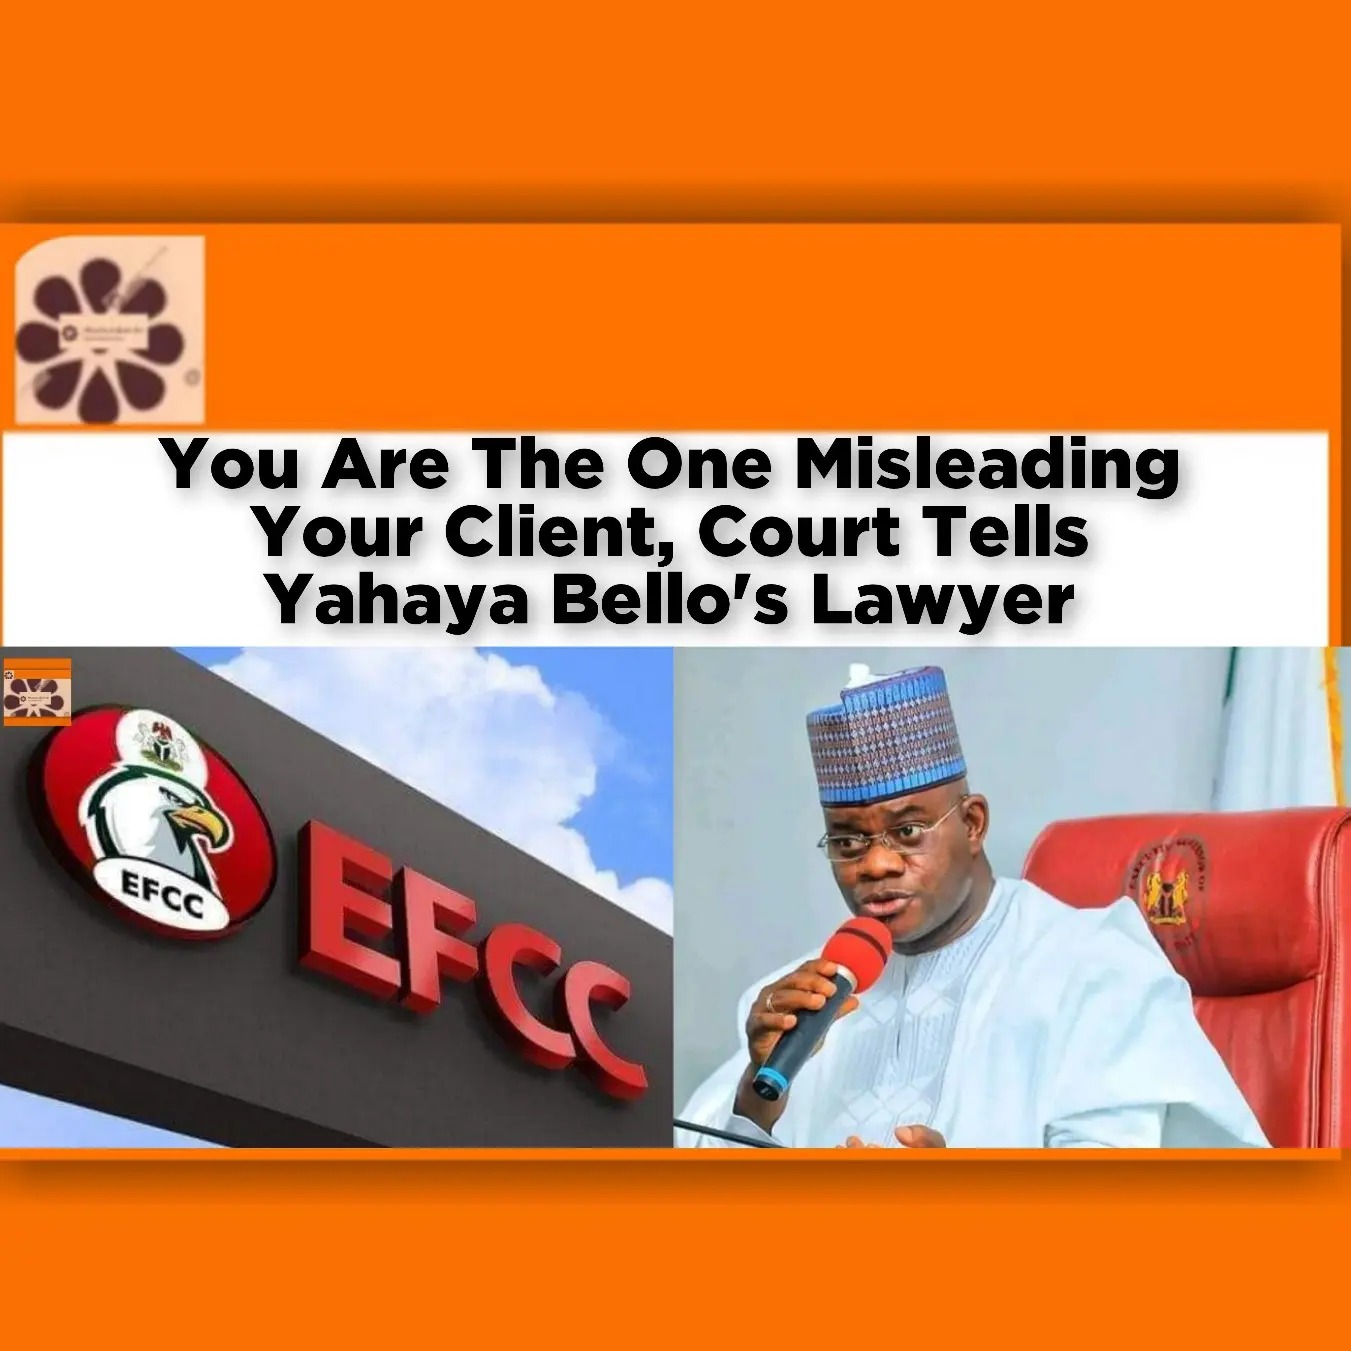 You Are The One Misleading Your Client, Court Tells Yahaya Bello's Lawyer ~ OsazuwaAkonedo #Abubakar